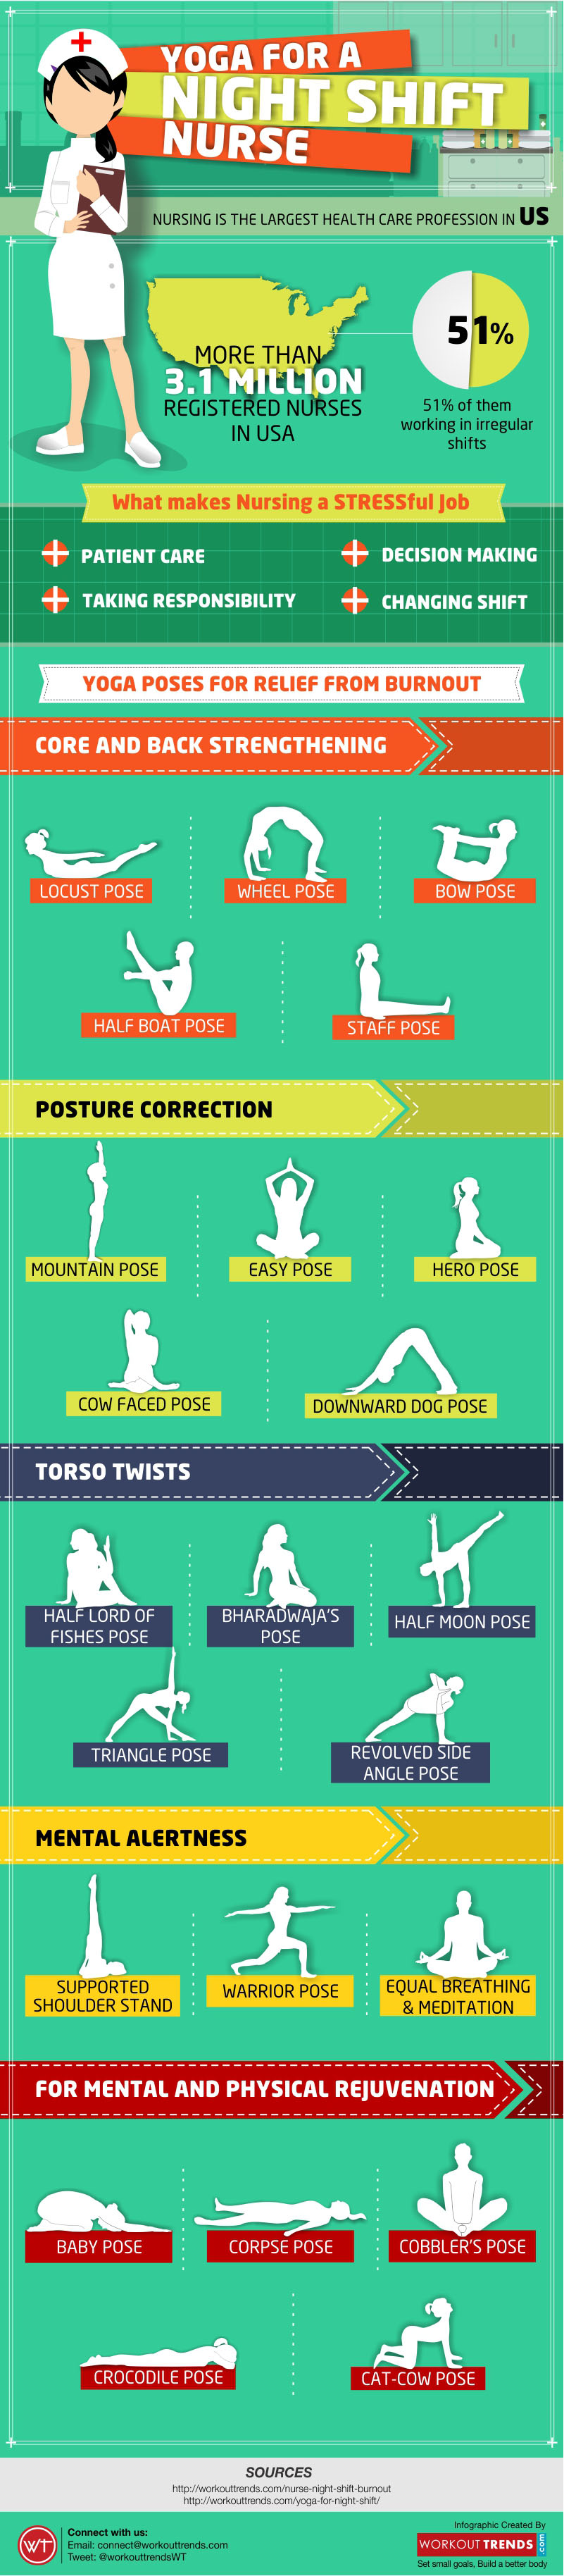 yoga for night shift nurse_workout_trends